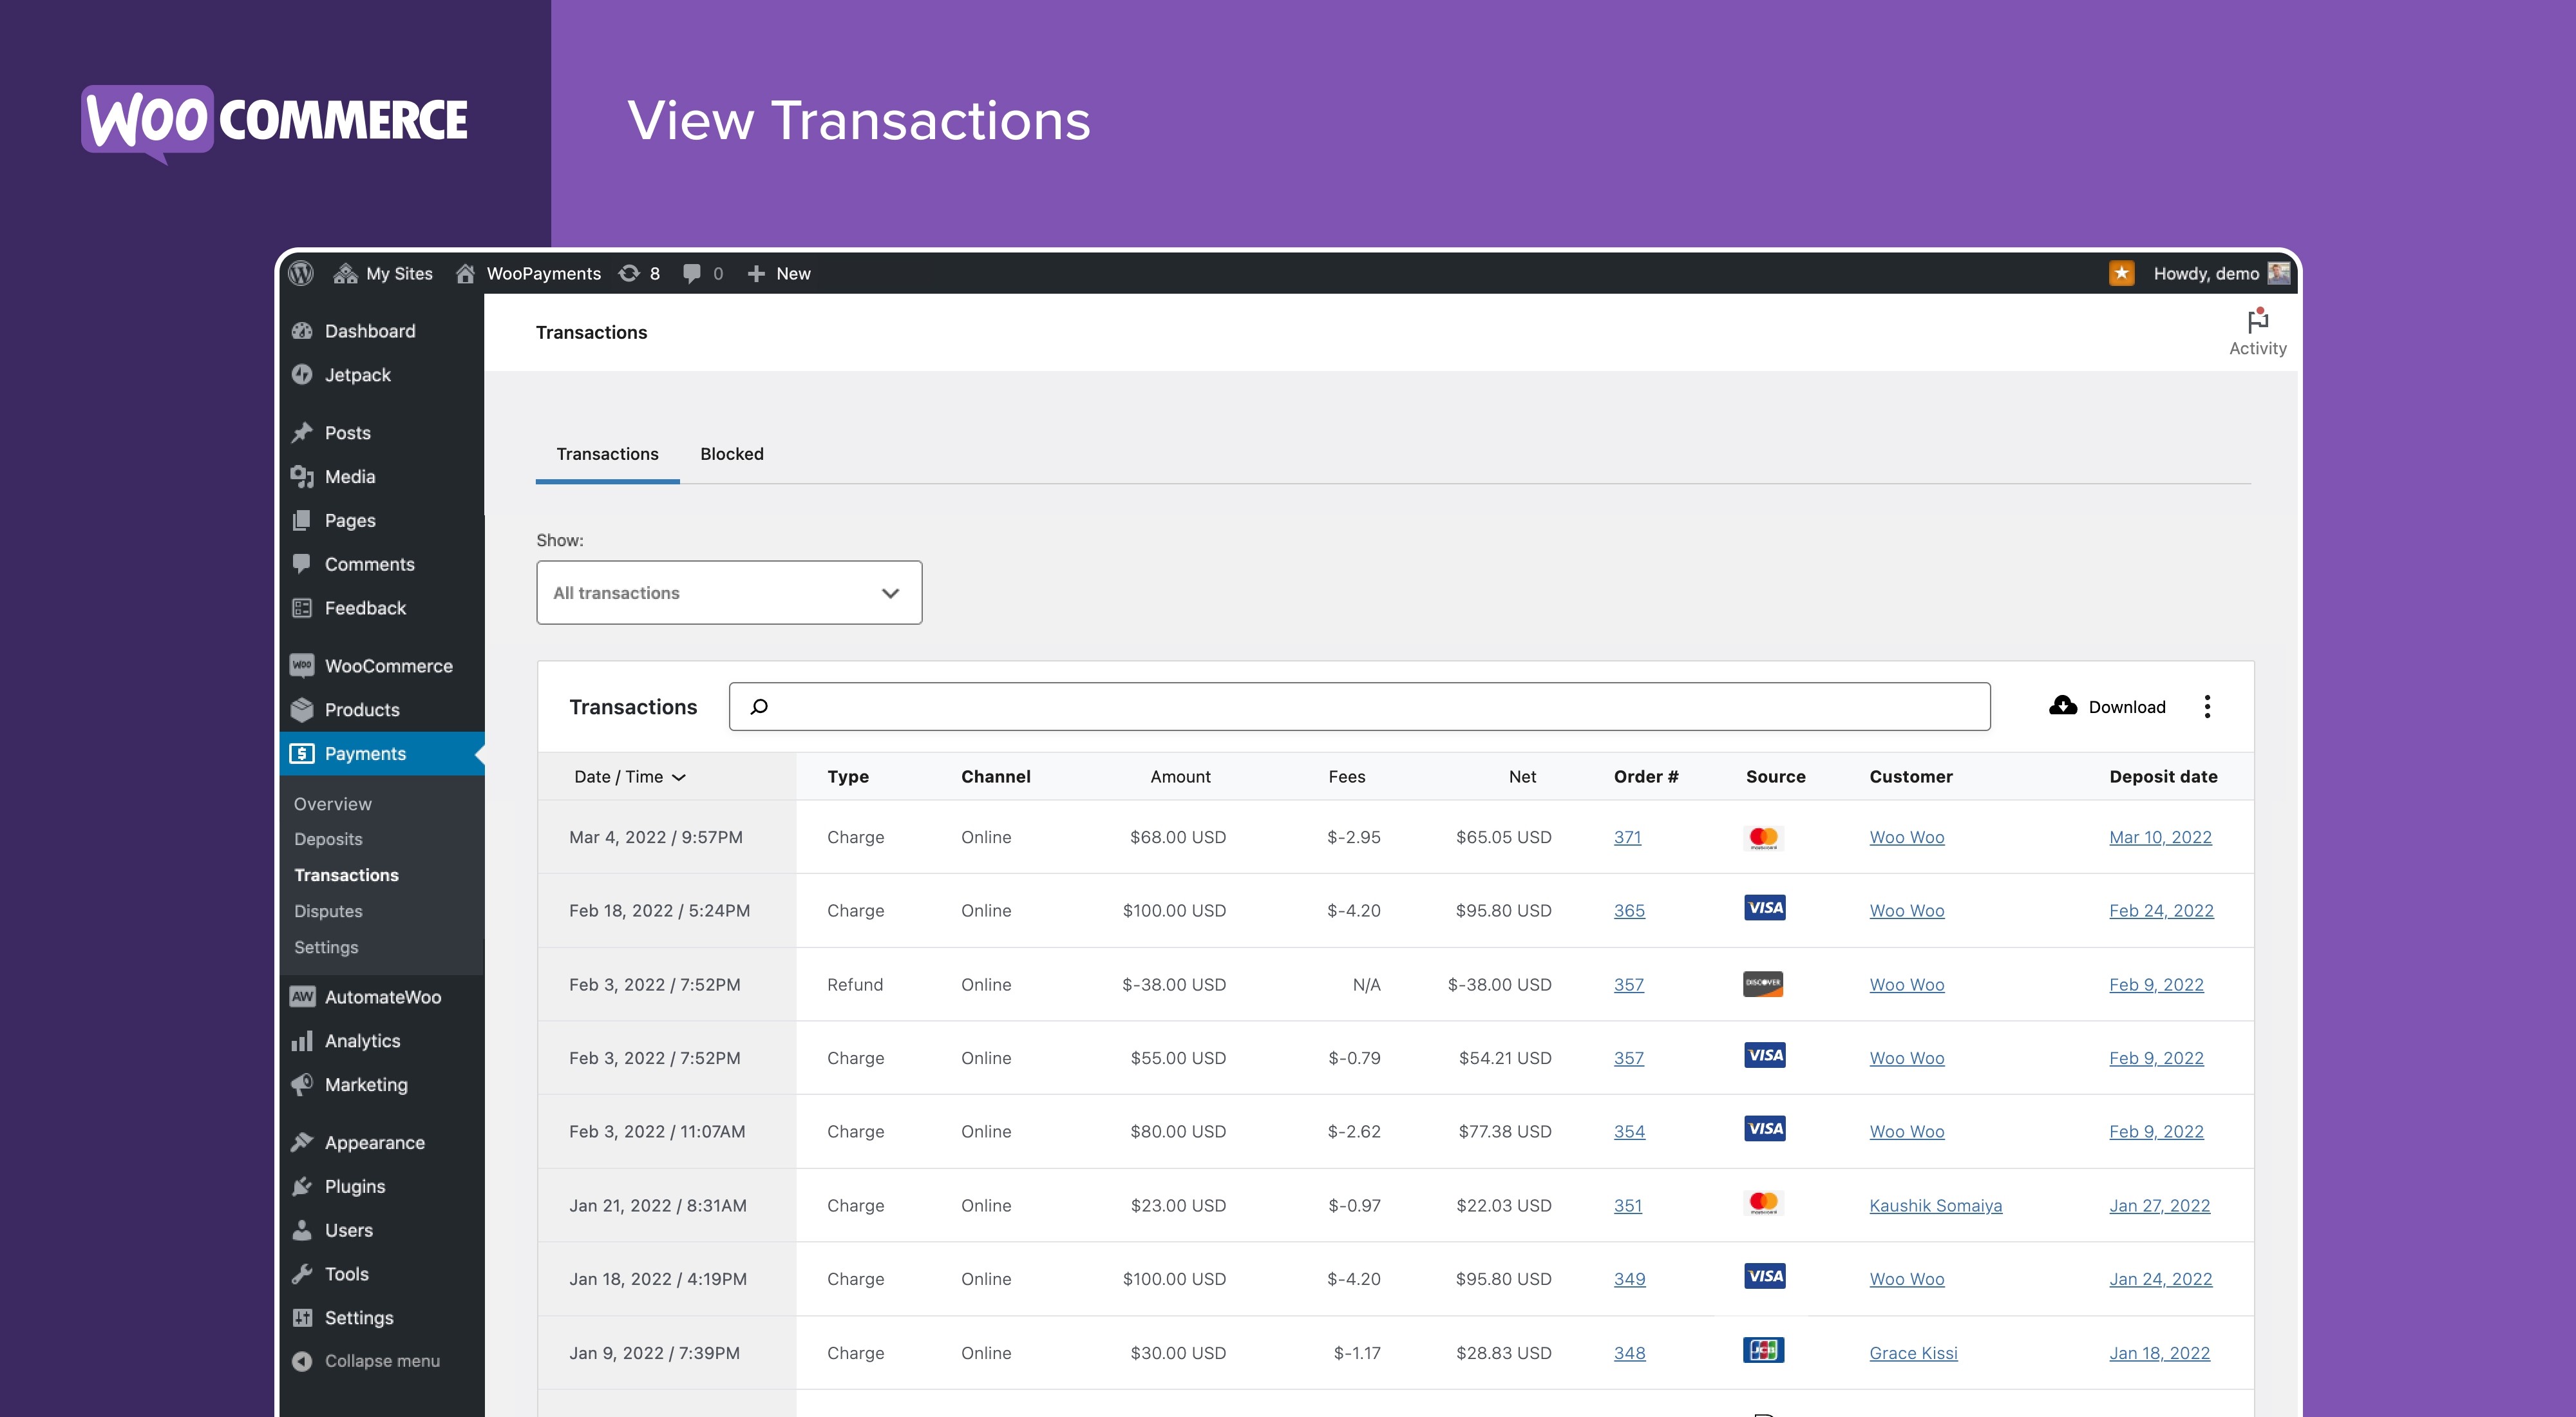 View Transactions